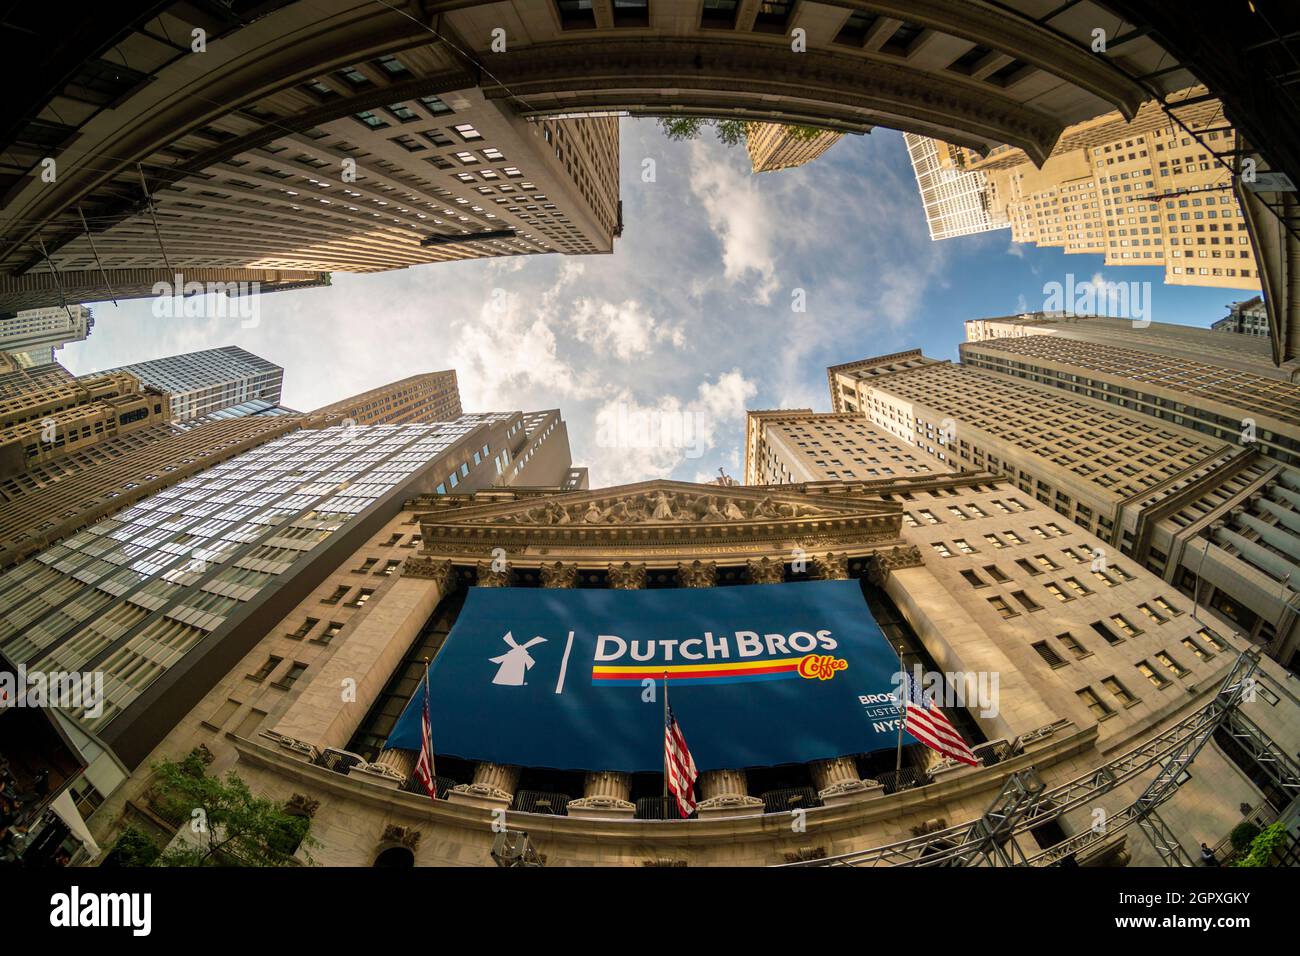 The facade of the New York Stock Exchange is decorated for the initial public offering of Southern Oregon chain, Dutch Bros coffee on Wednesday, September 15, 2021. The over 470 shops, which are drive-thru only, are in 11 states. (© Richard B. Levine) Stock Photo